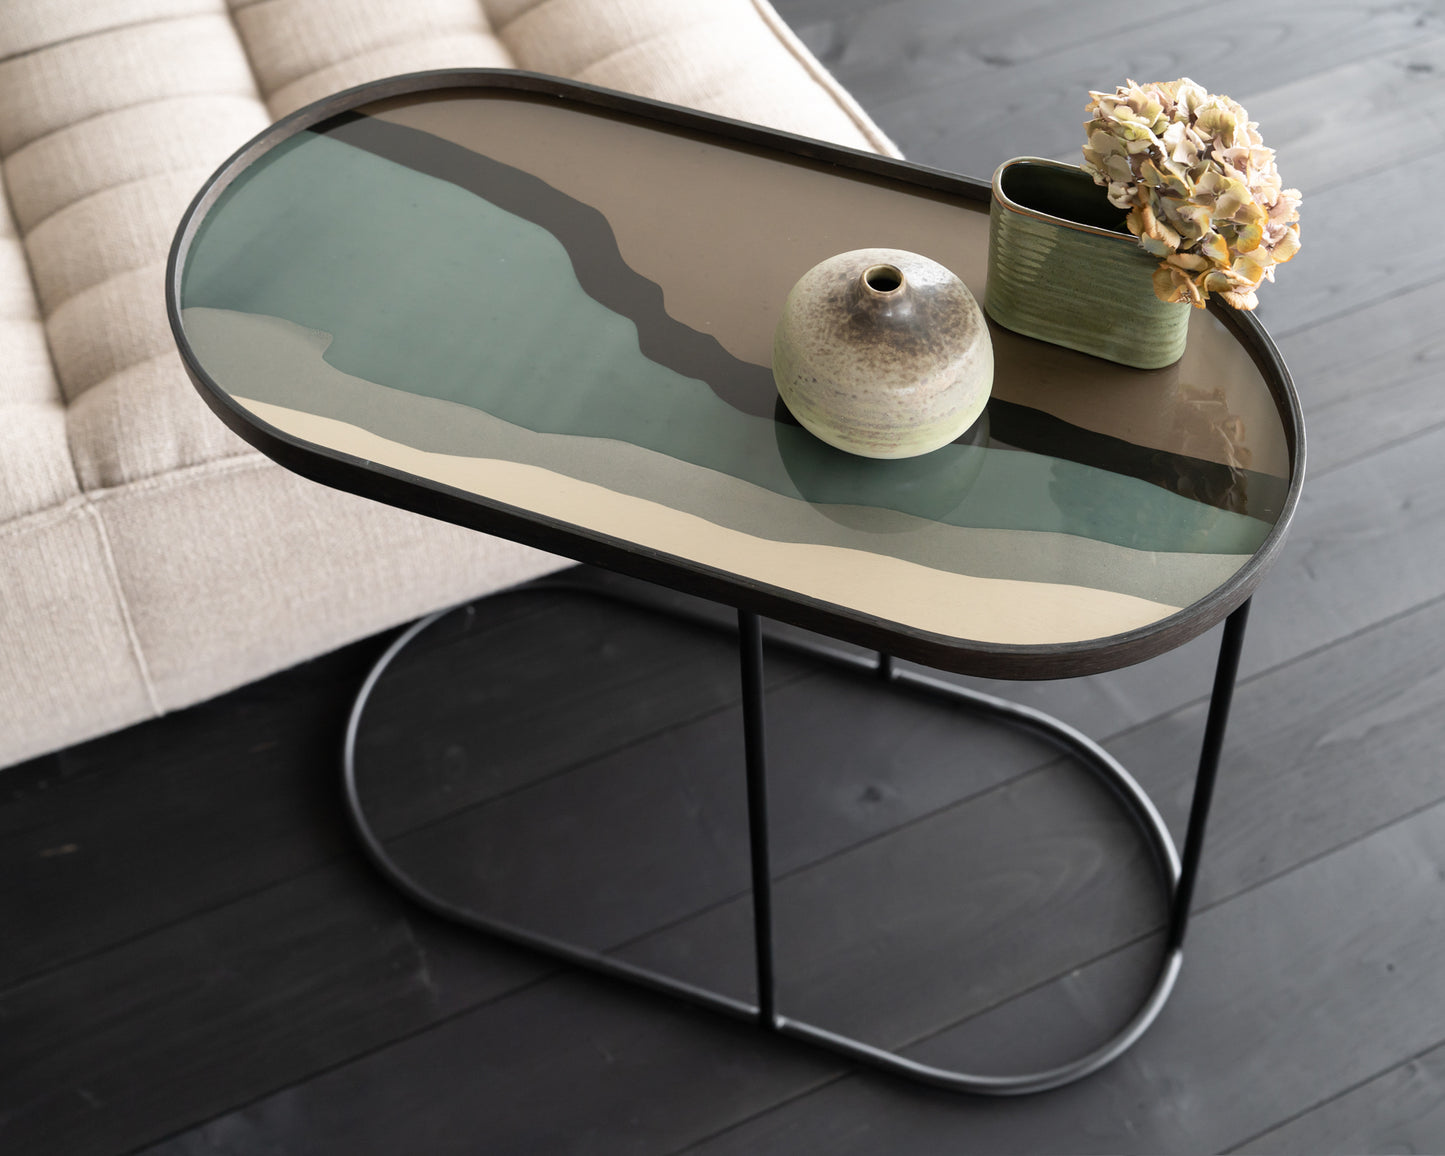 Oblong tray side table (tray not included)